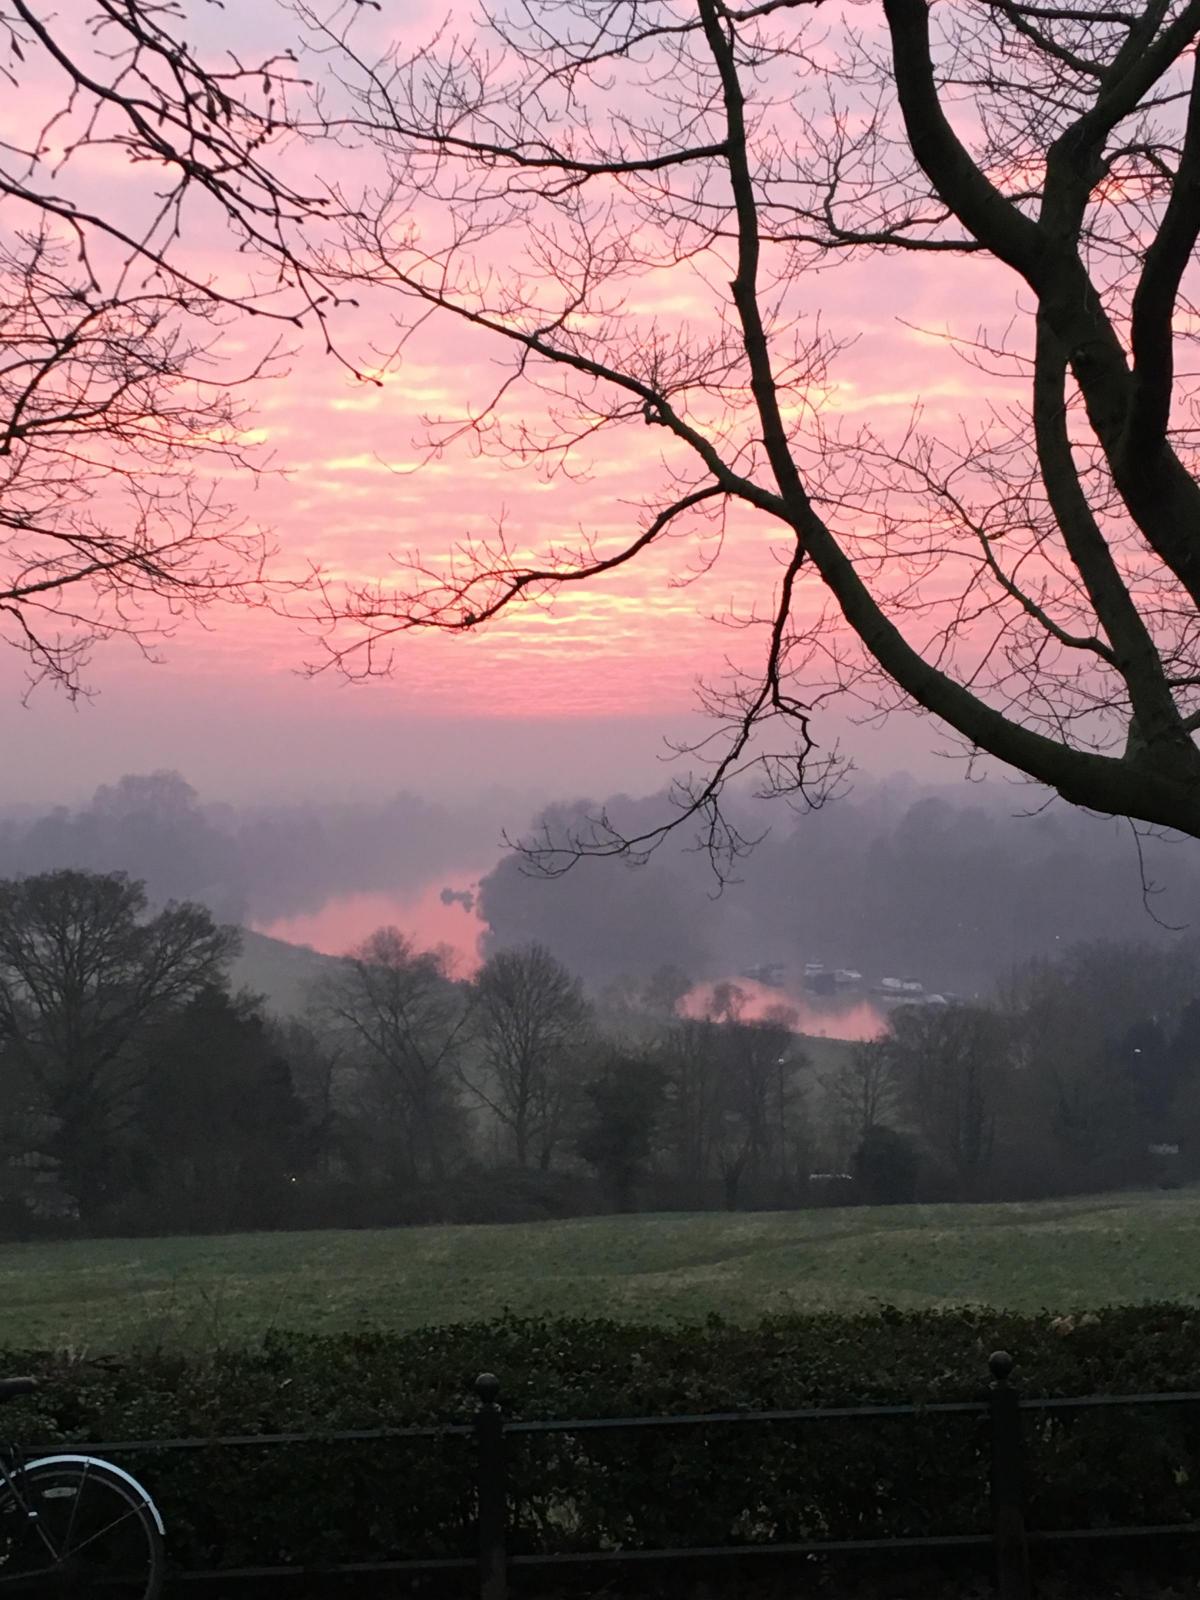 Paul Ash - a Richmond caddie - took this photo of the sunset over Richmond on January 18.